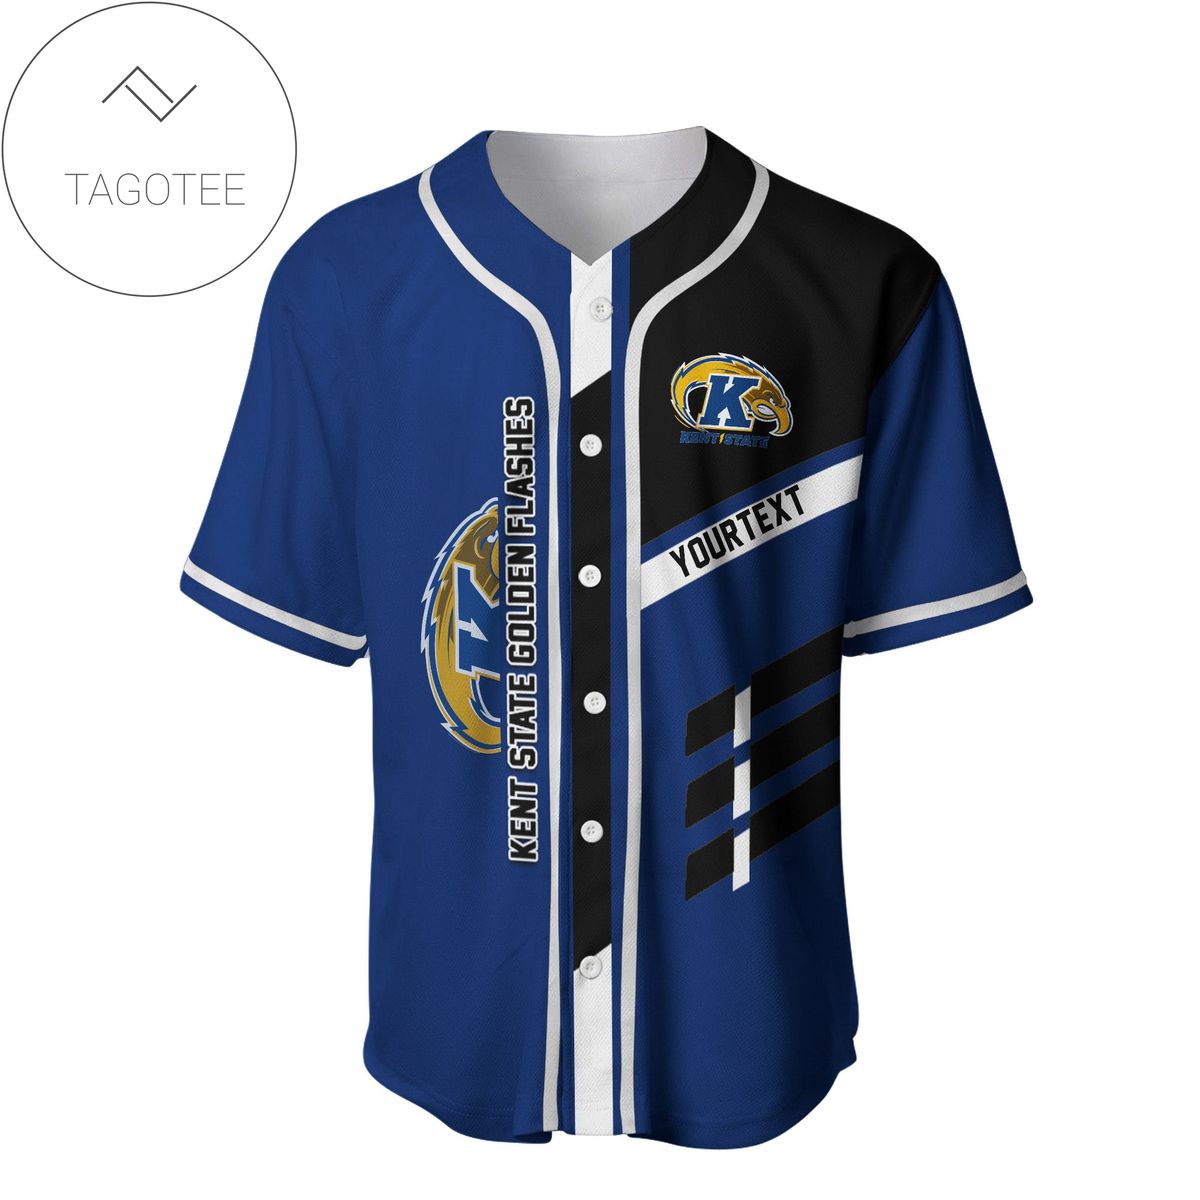 Personalized Kent State Golden Flashes Baseball Jersey - NCAA